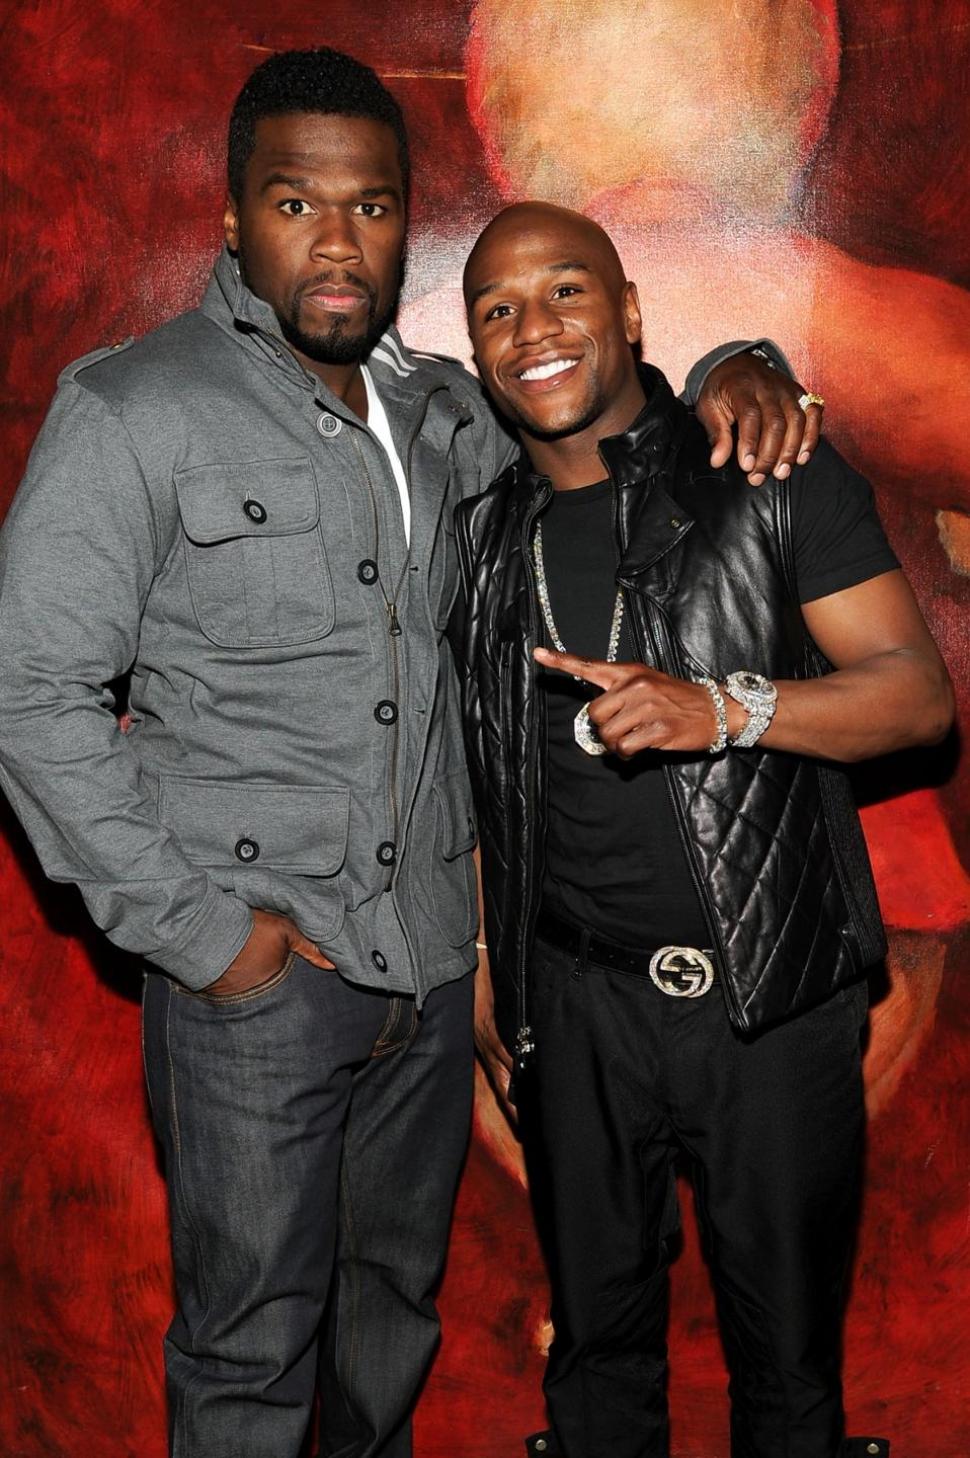 Happier times: 50 Cent has feuded for days with Floyd Mayweather Jr., mocking the champ as illiterate.